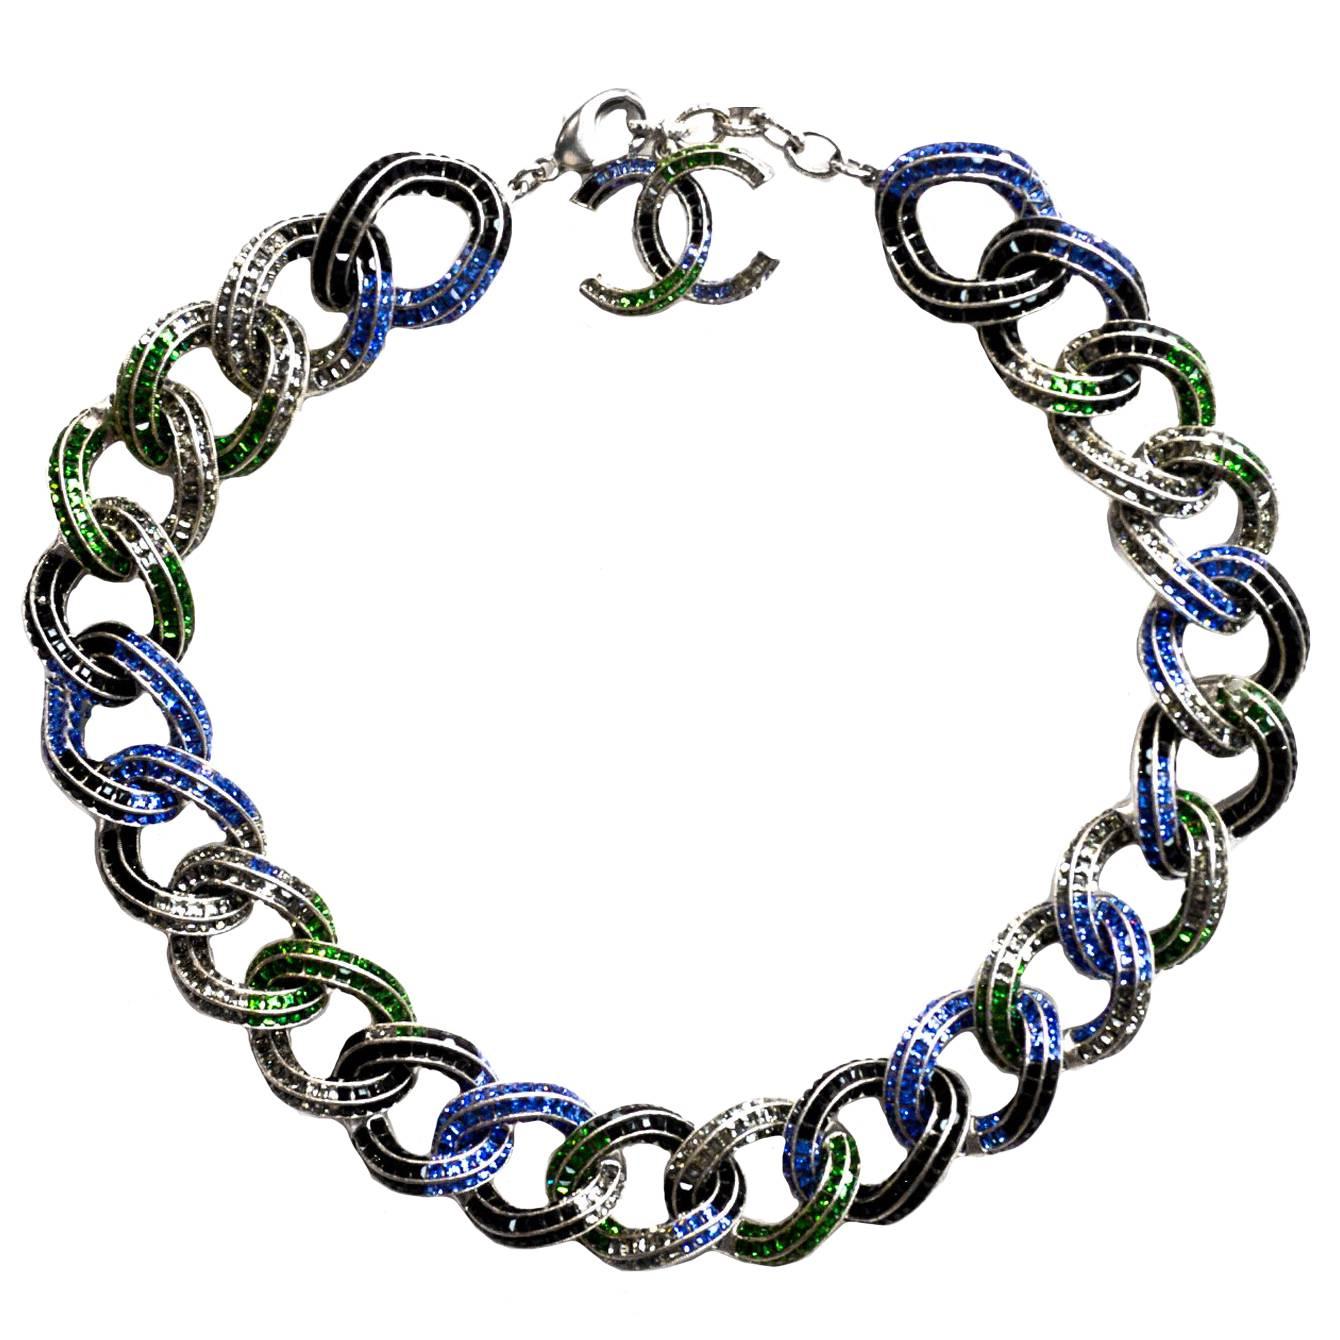 Chanel ’15 Runway Multi-Colored Crystal Encrusted Chain Link Necklace rt. $6, 650